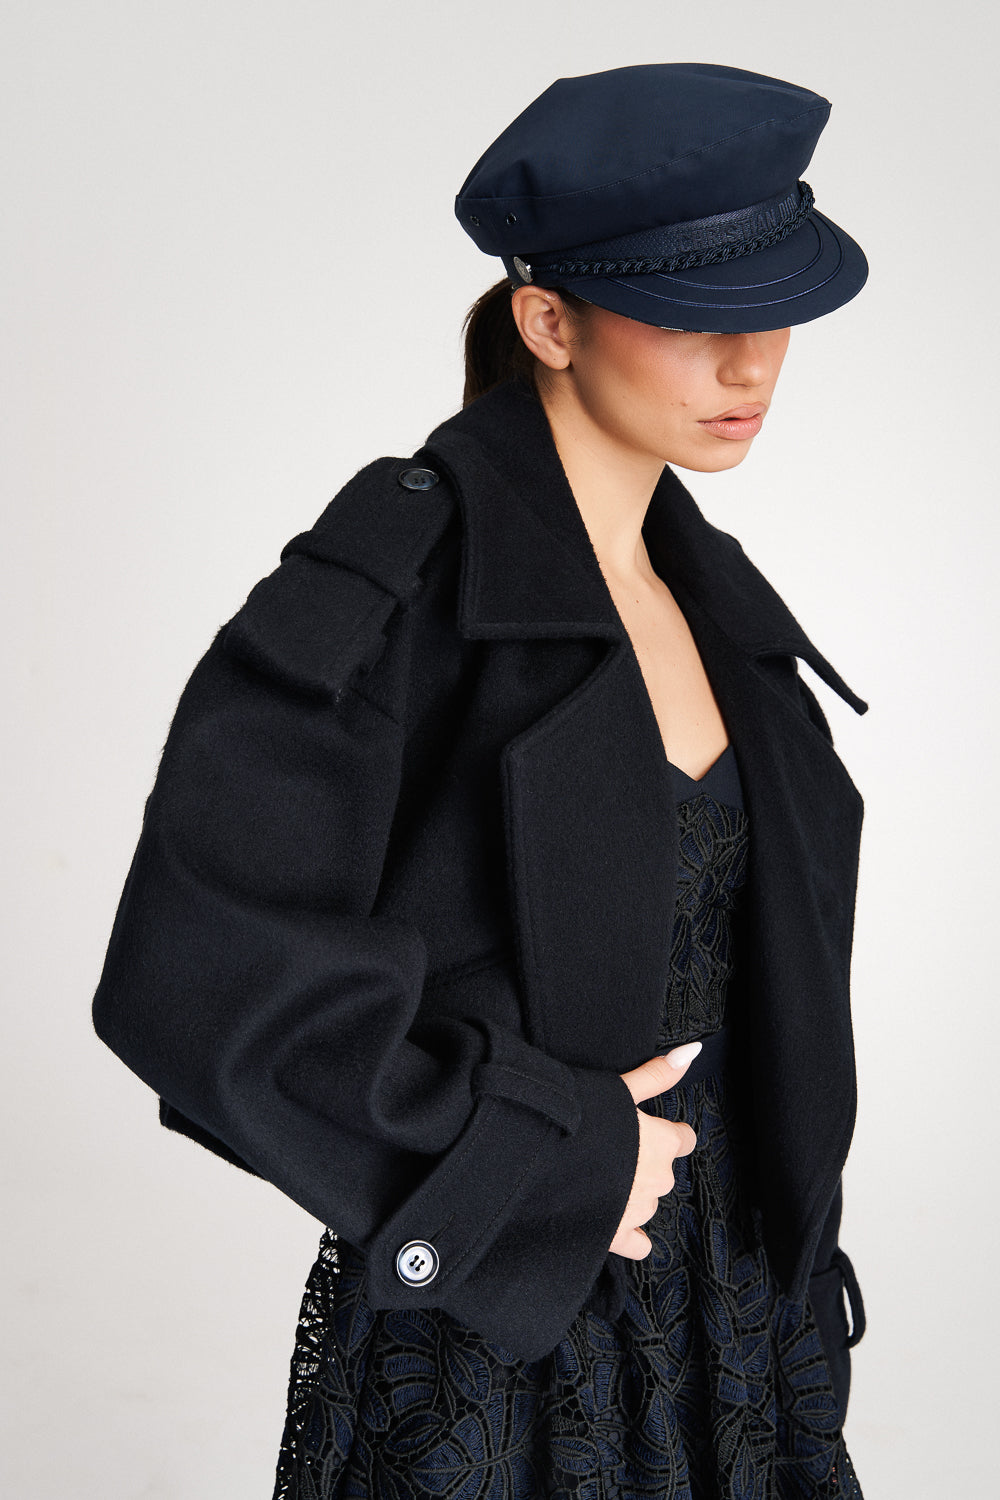 'Rae' Cropped Navy Double-Breasted Wool Coat